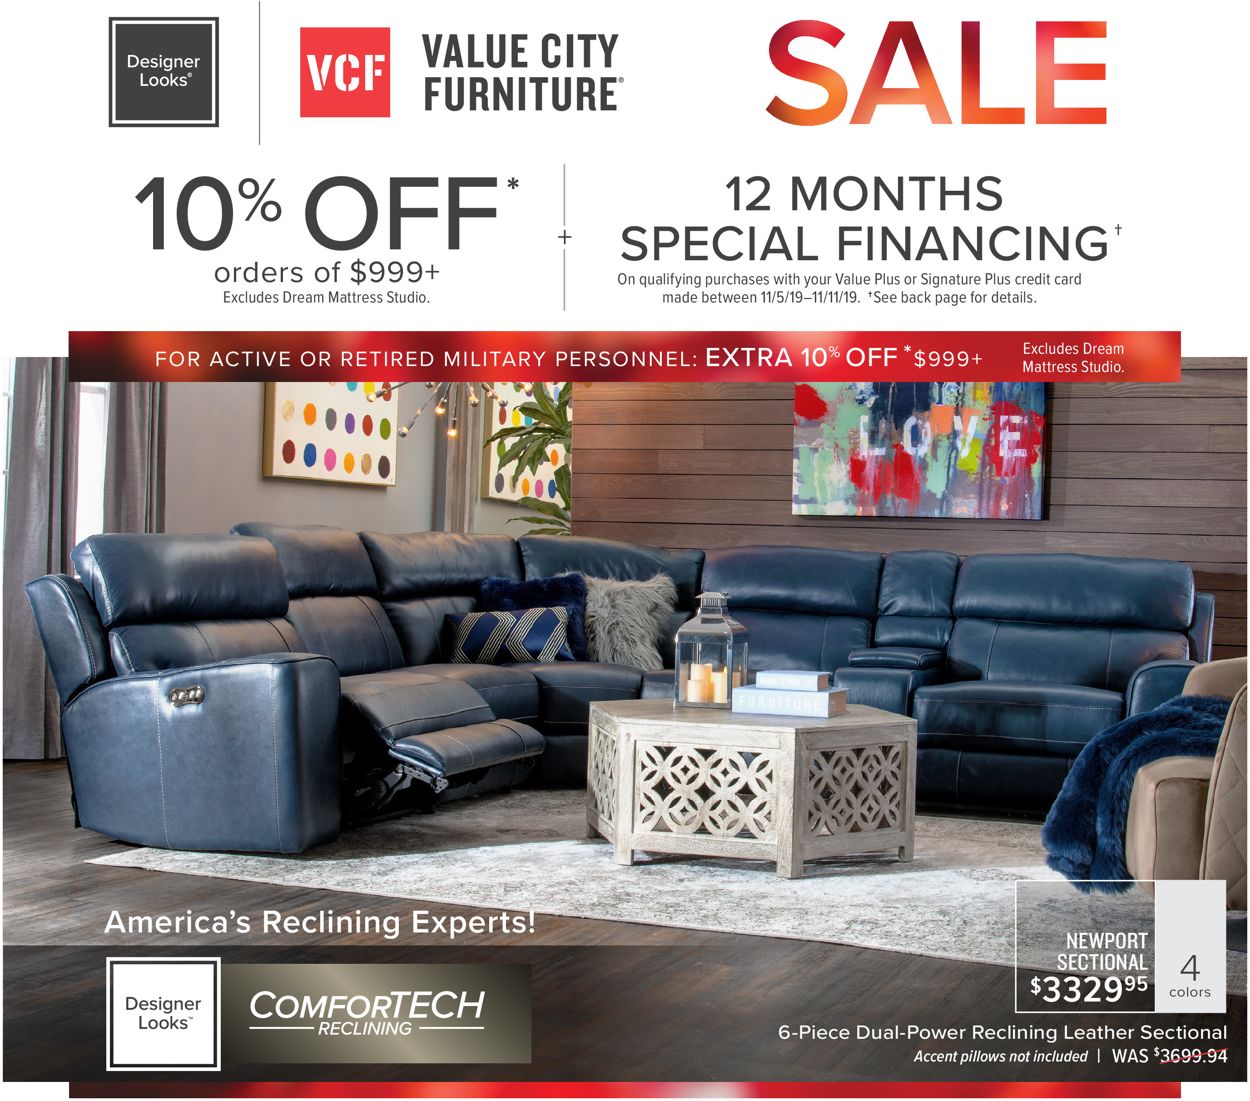 Value City Furniture Cur Weekly Ad, Value City Leather Sectional